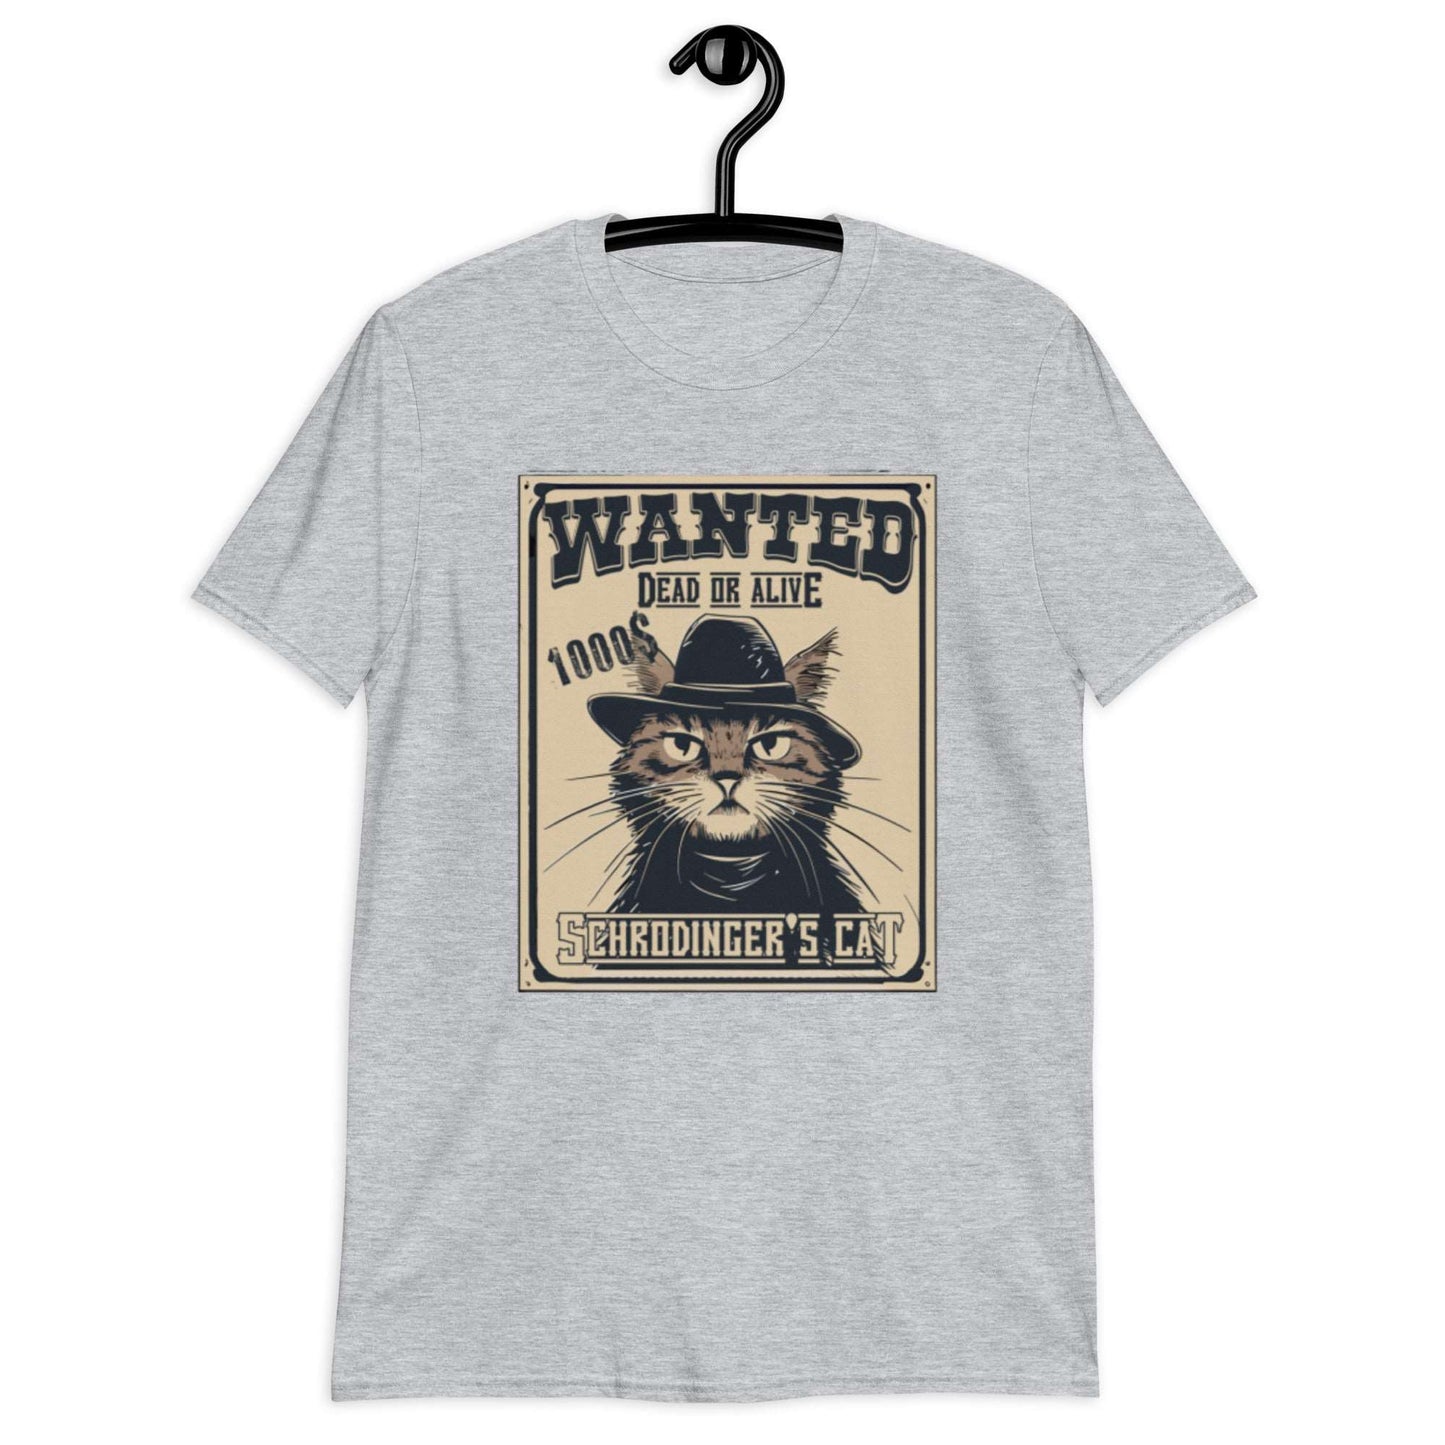 The Purrfect Paradox: Wanted Schrödinger's Cat Tee